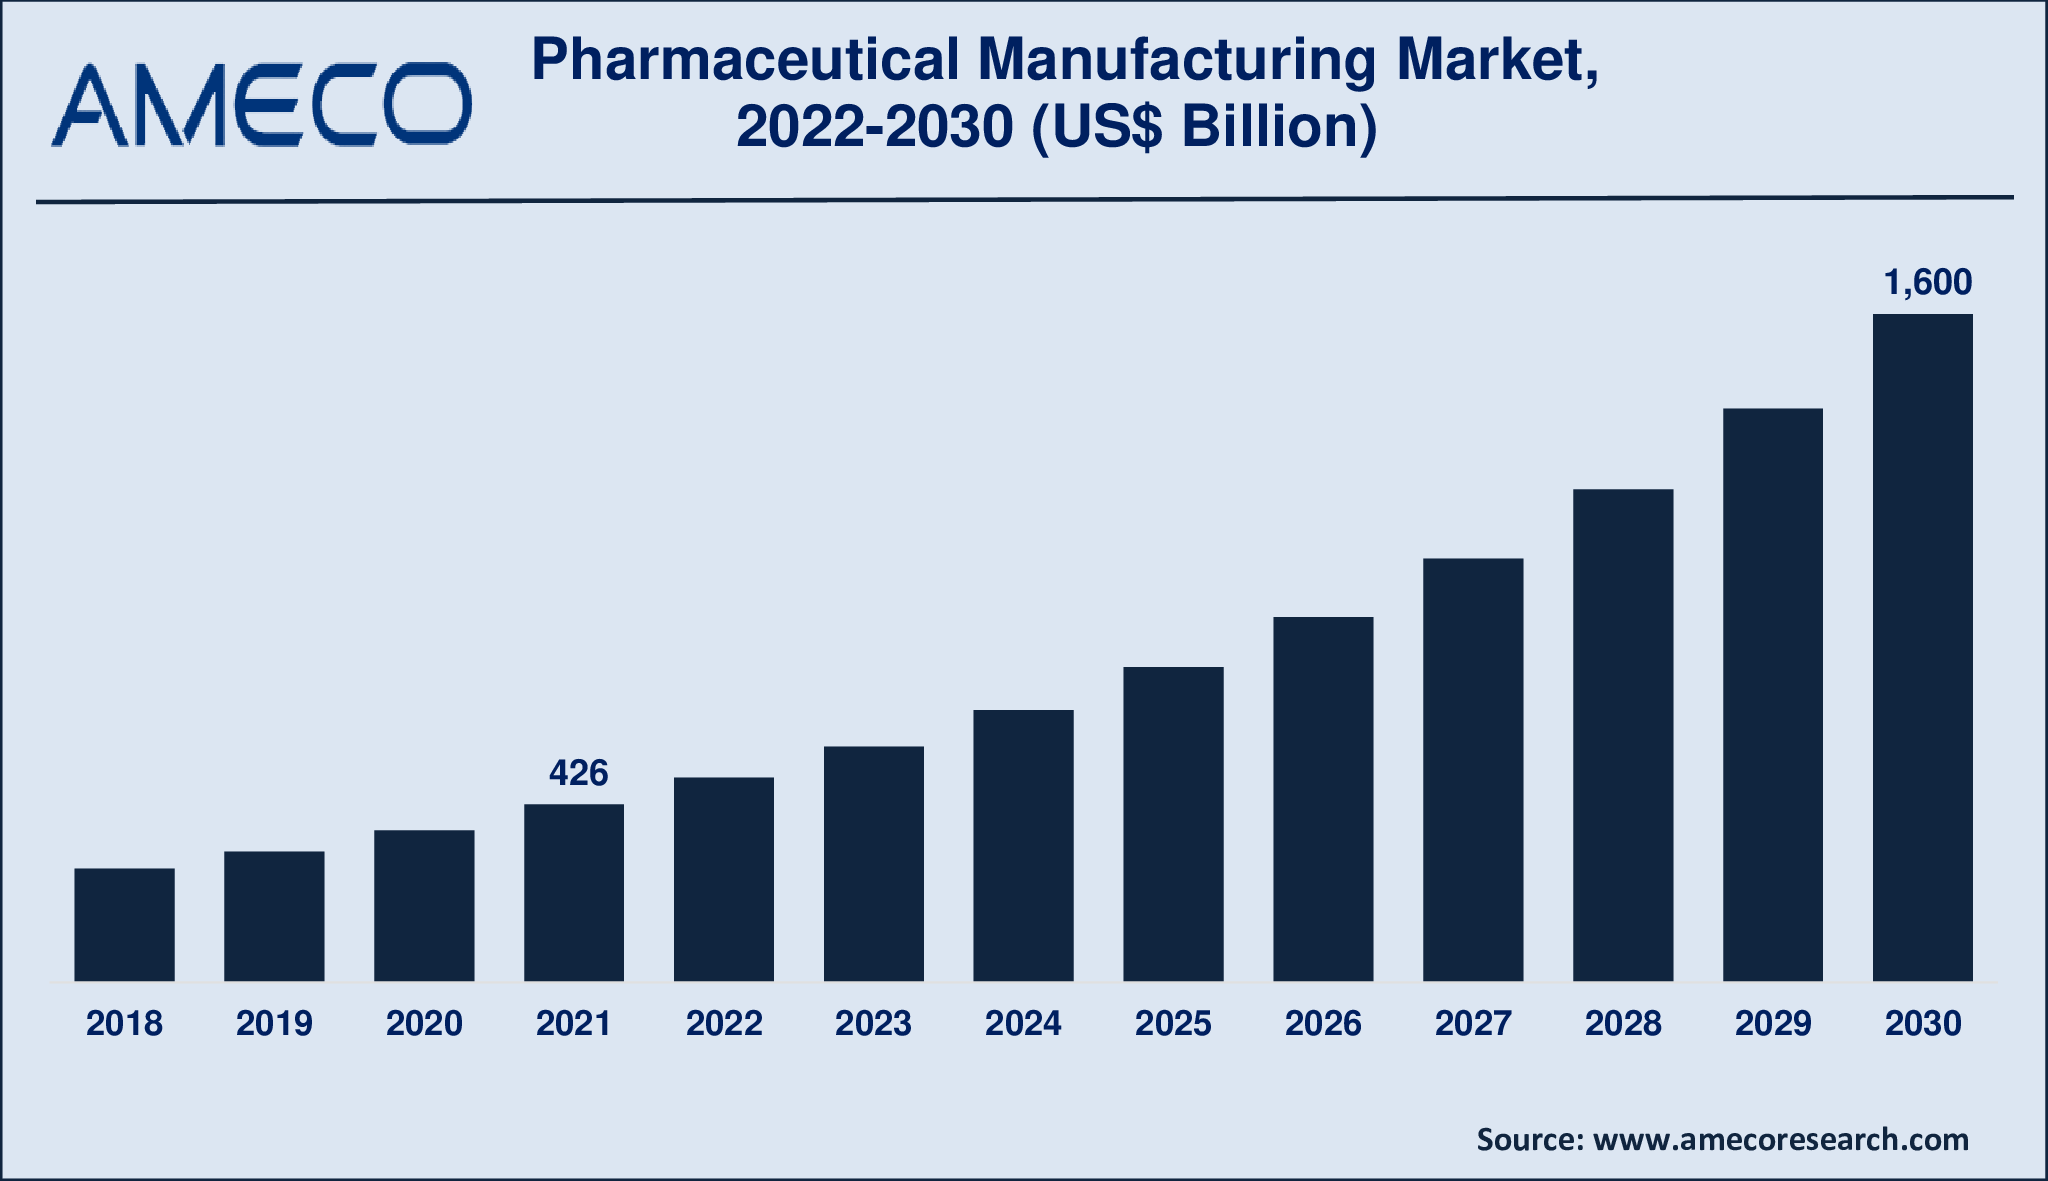 Pharmaceutical Manufacturing Market Size, Share, Growth, Trends, and Forecast 2022-2030